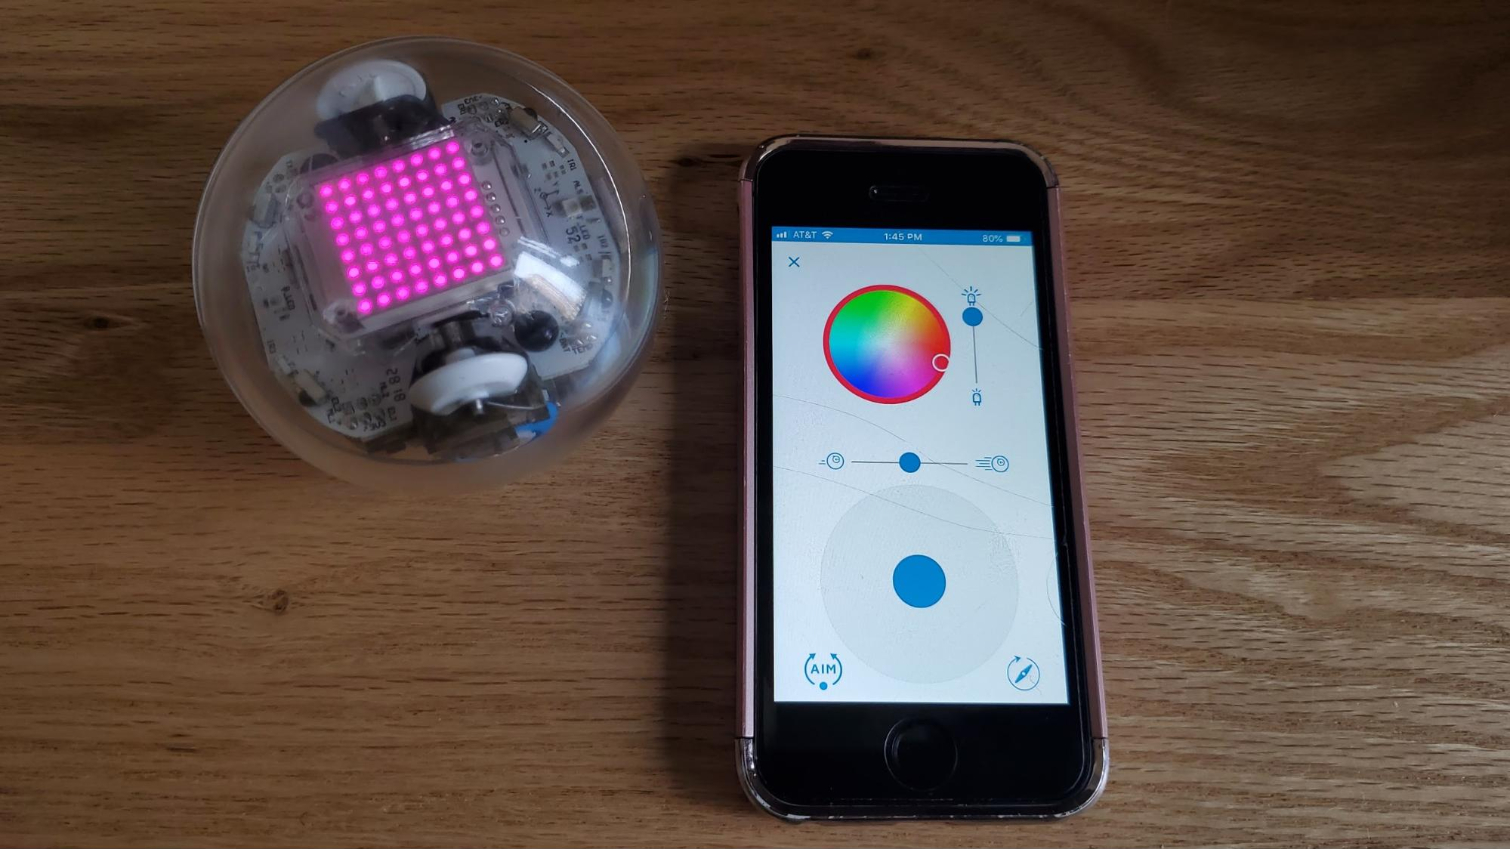 Sphero BOLT Coding Robot, Privacy & security guide